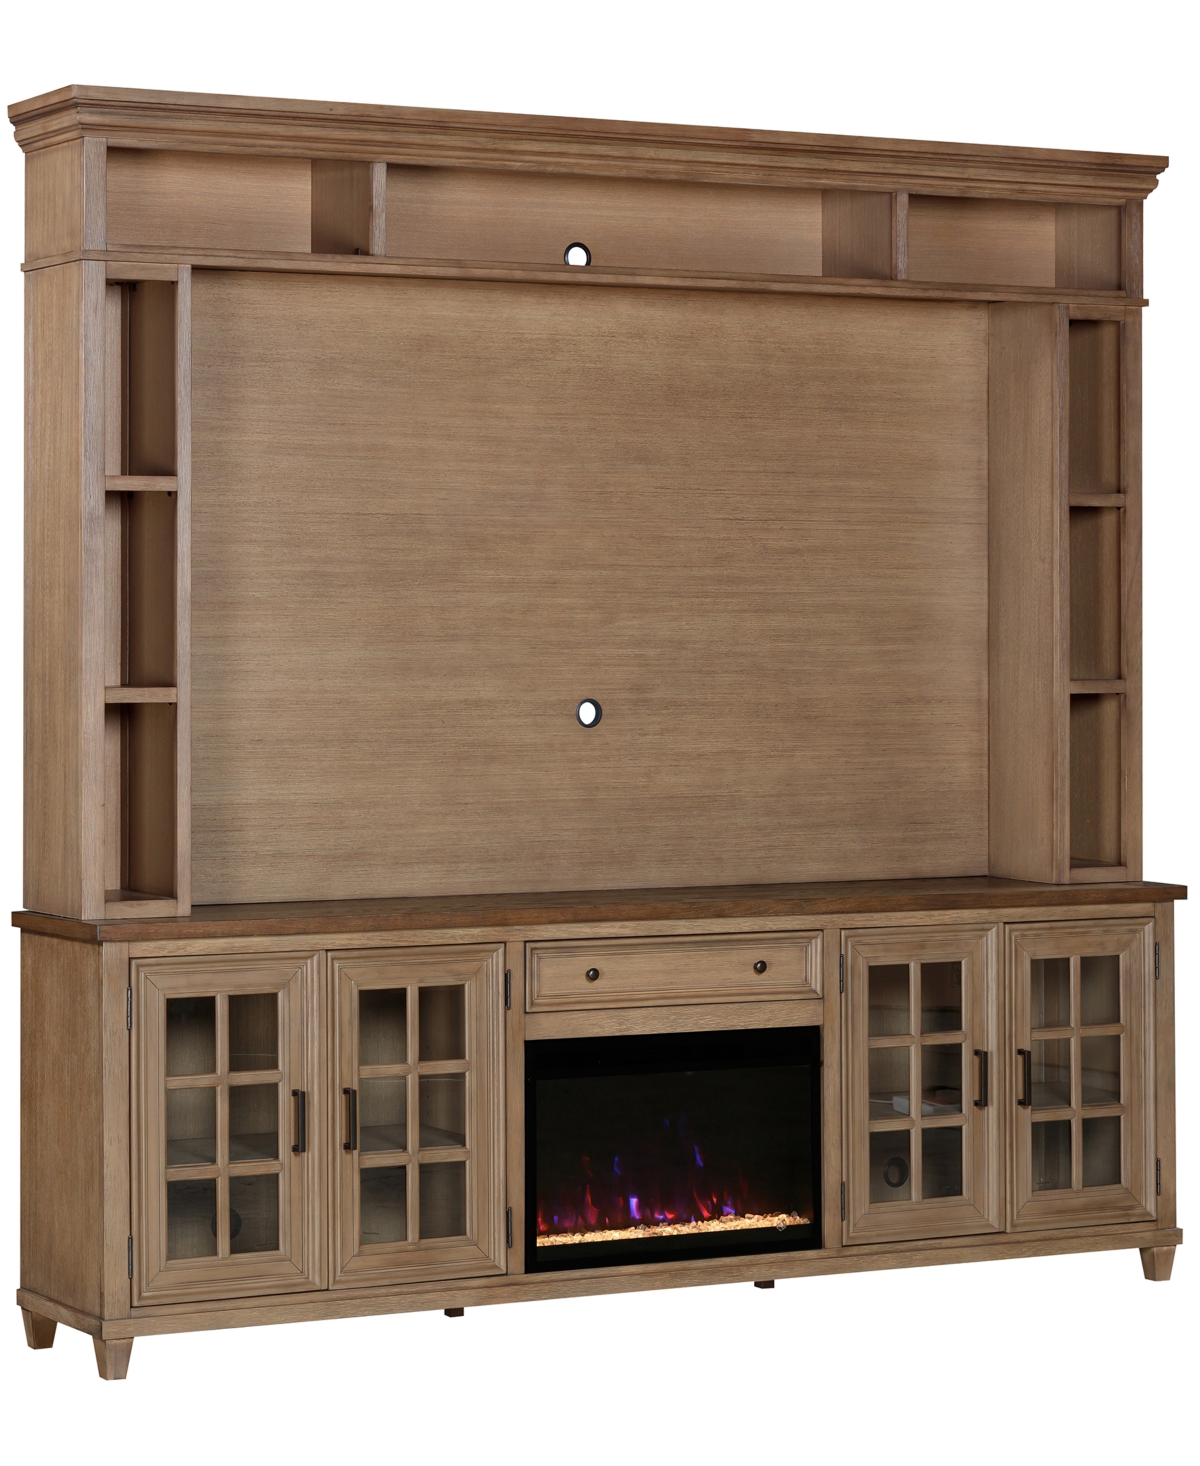 Macy's 96" Dawnwood 3pc Tv Console Set (96" Console, Hutch And Fireplace) In Wheat